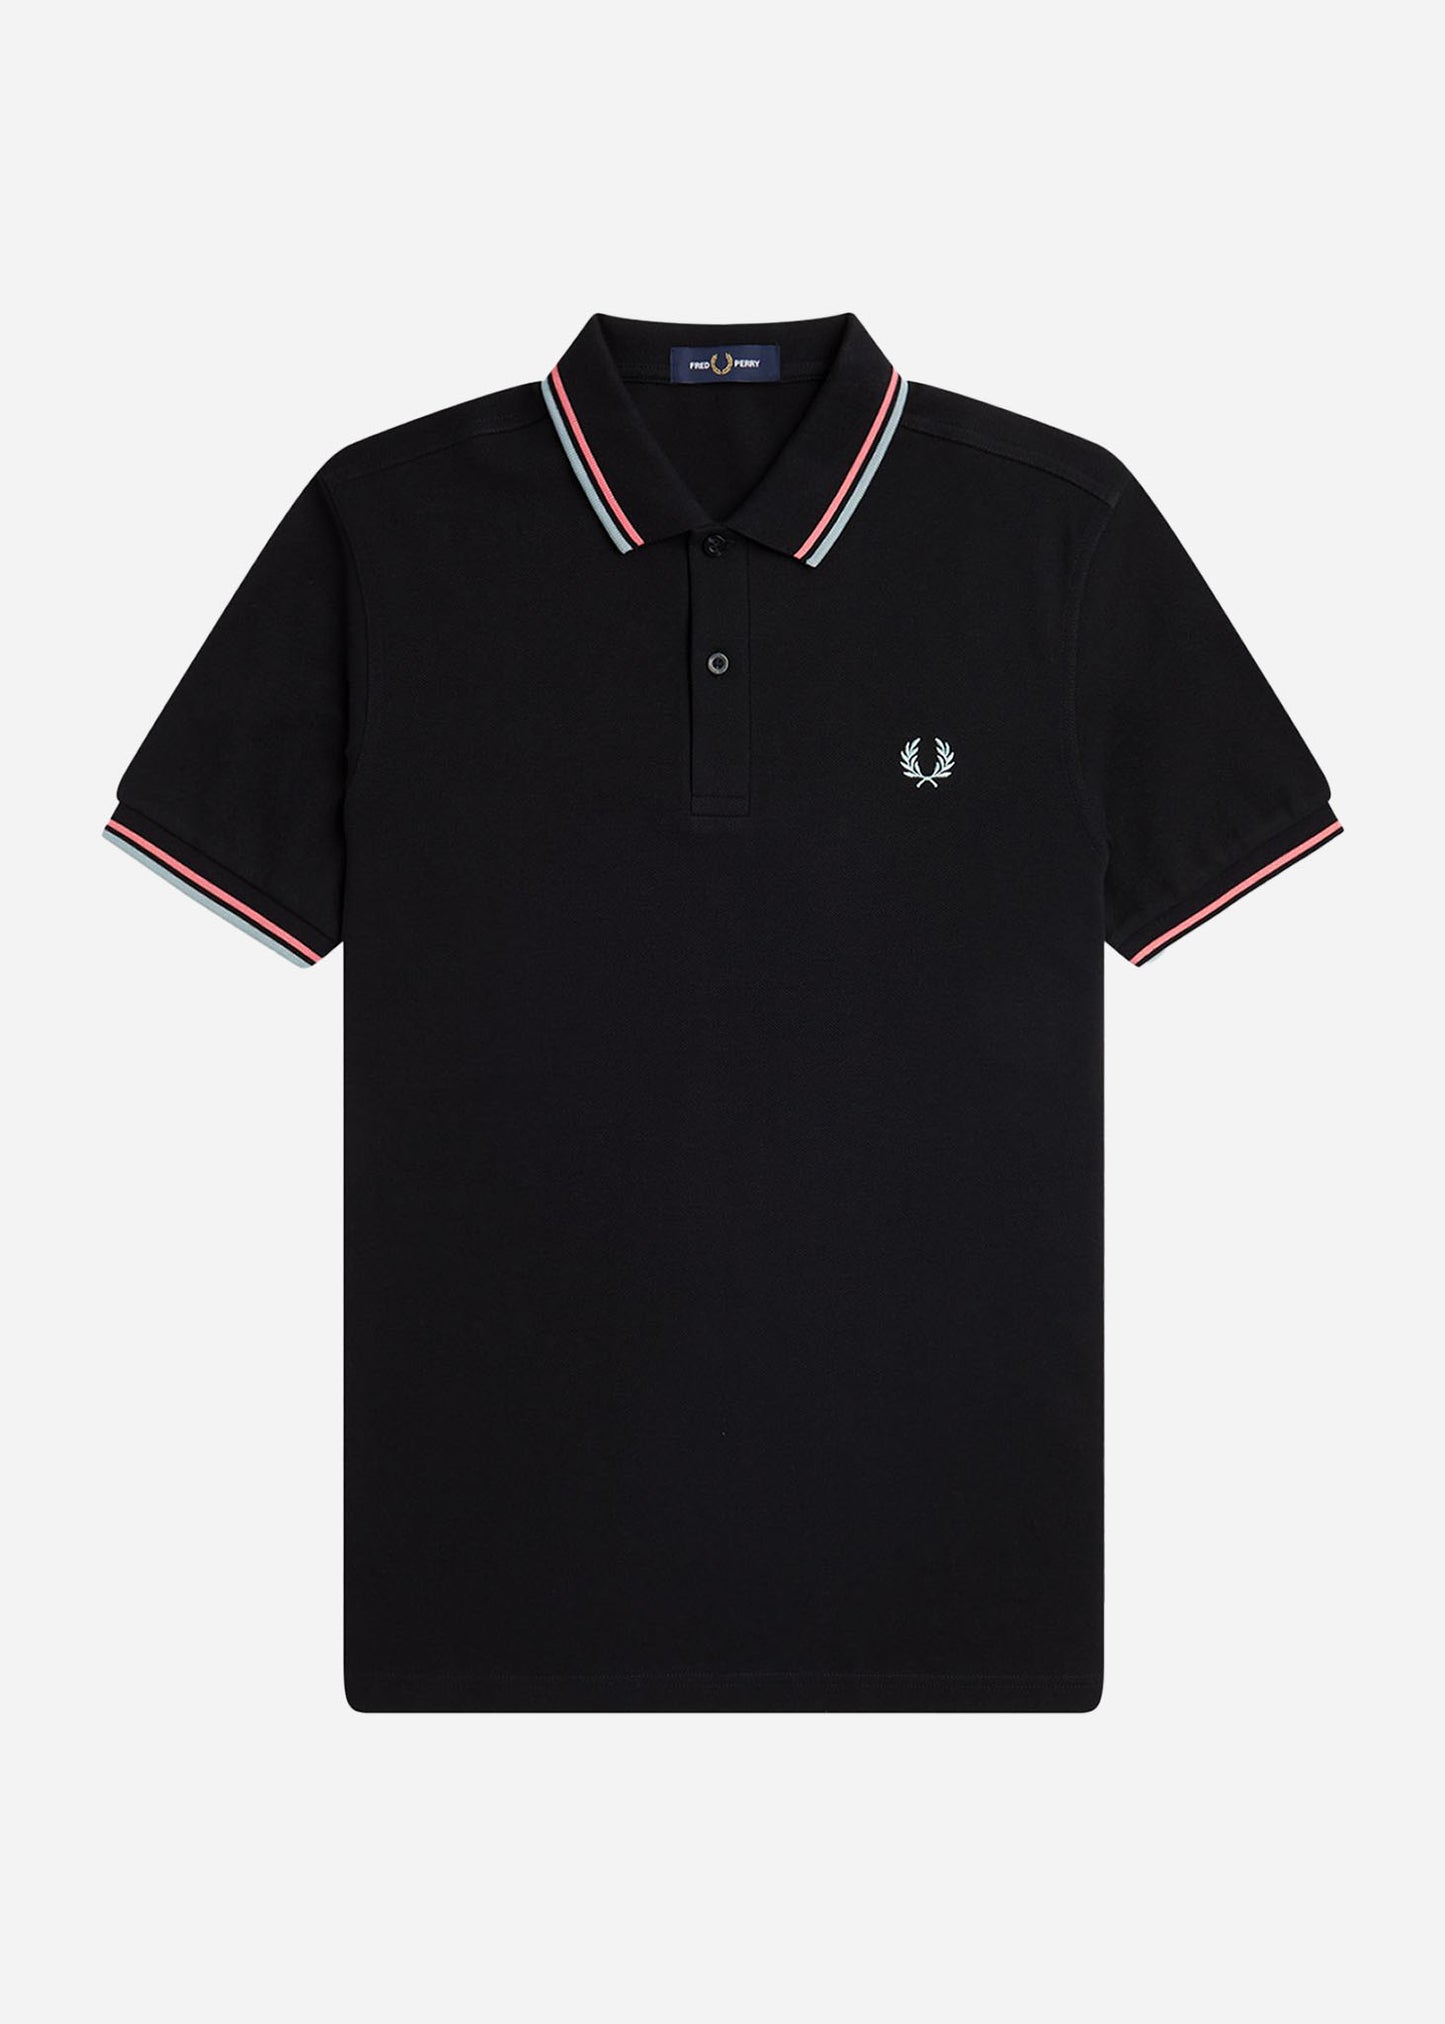 Fred Perry Polo's  Twin tipped fred perry shirt - black crlhet slvbl 